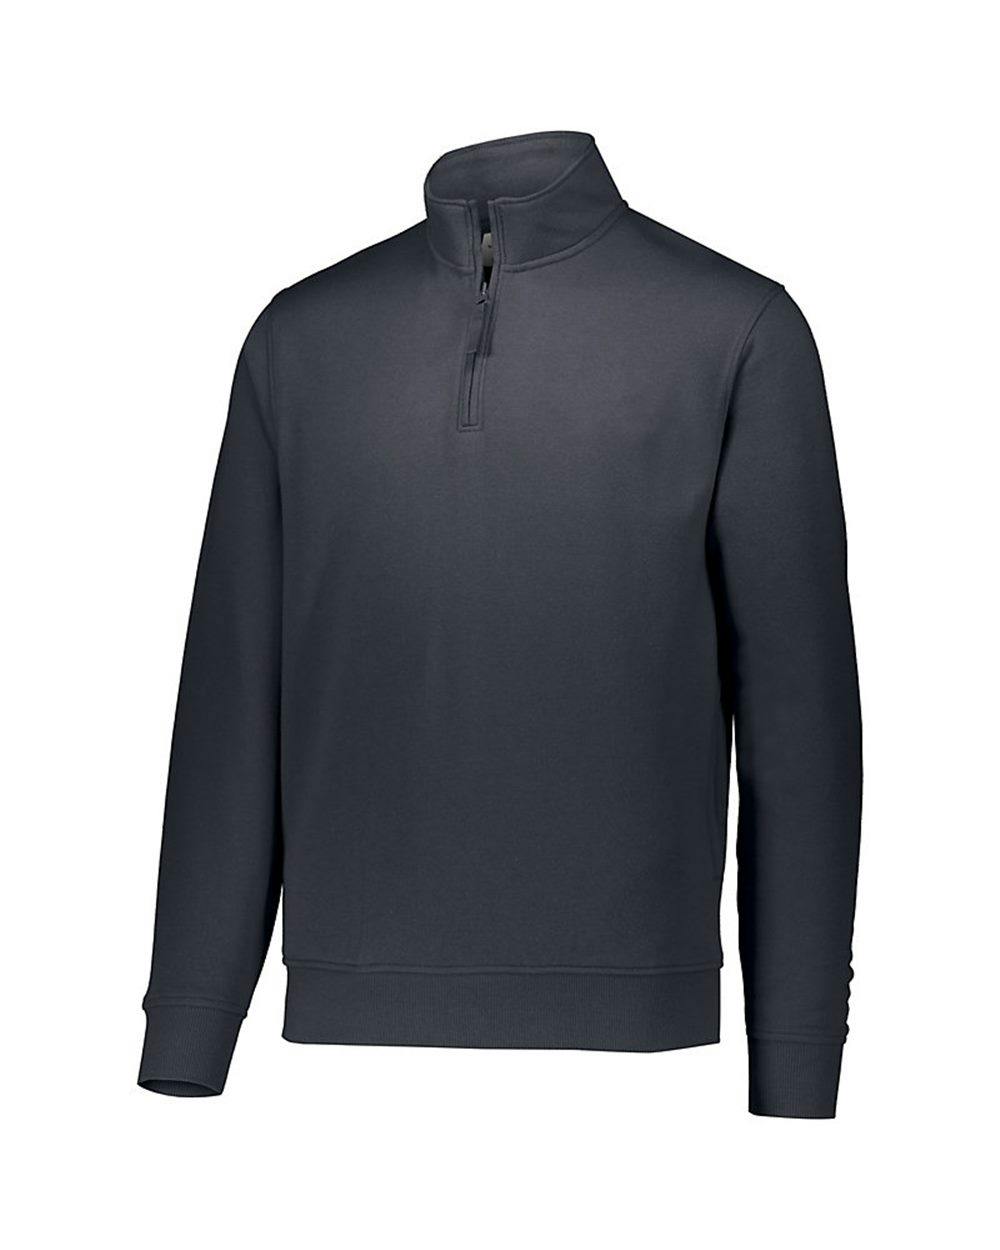 Image for 60/40 Fleece Pullover - 5422